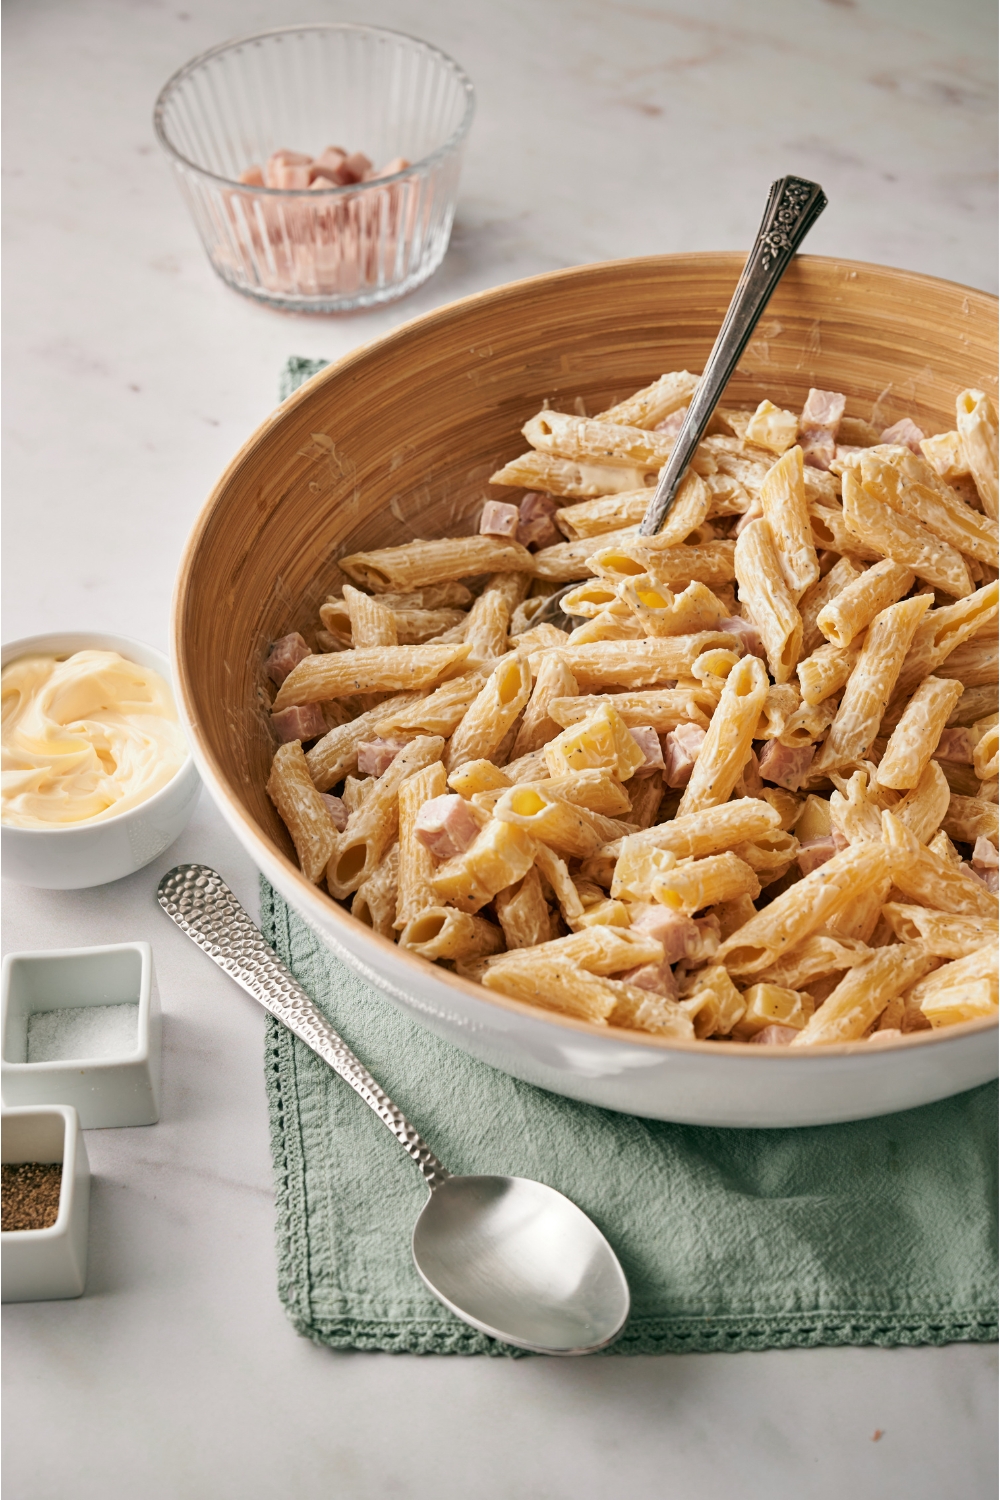 A brown and white bowl with penne pasta, cubed ham, and cubed cheese tossed in a creamy dressing, with a spoon in the bowl and a spoon next to the bowl.